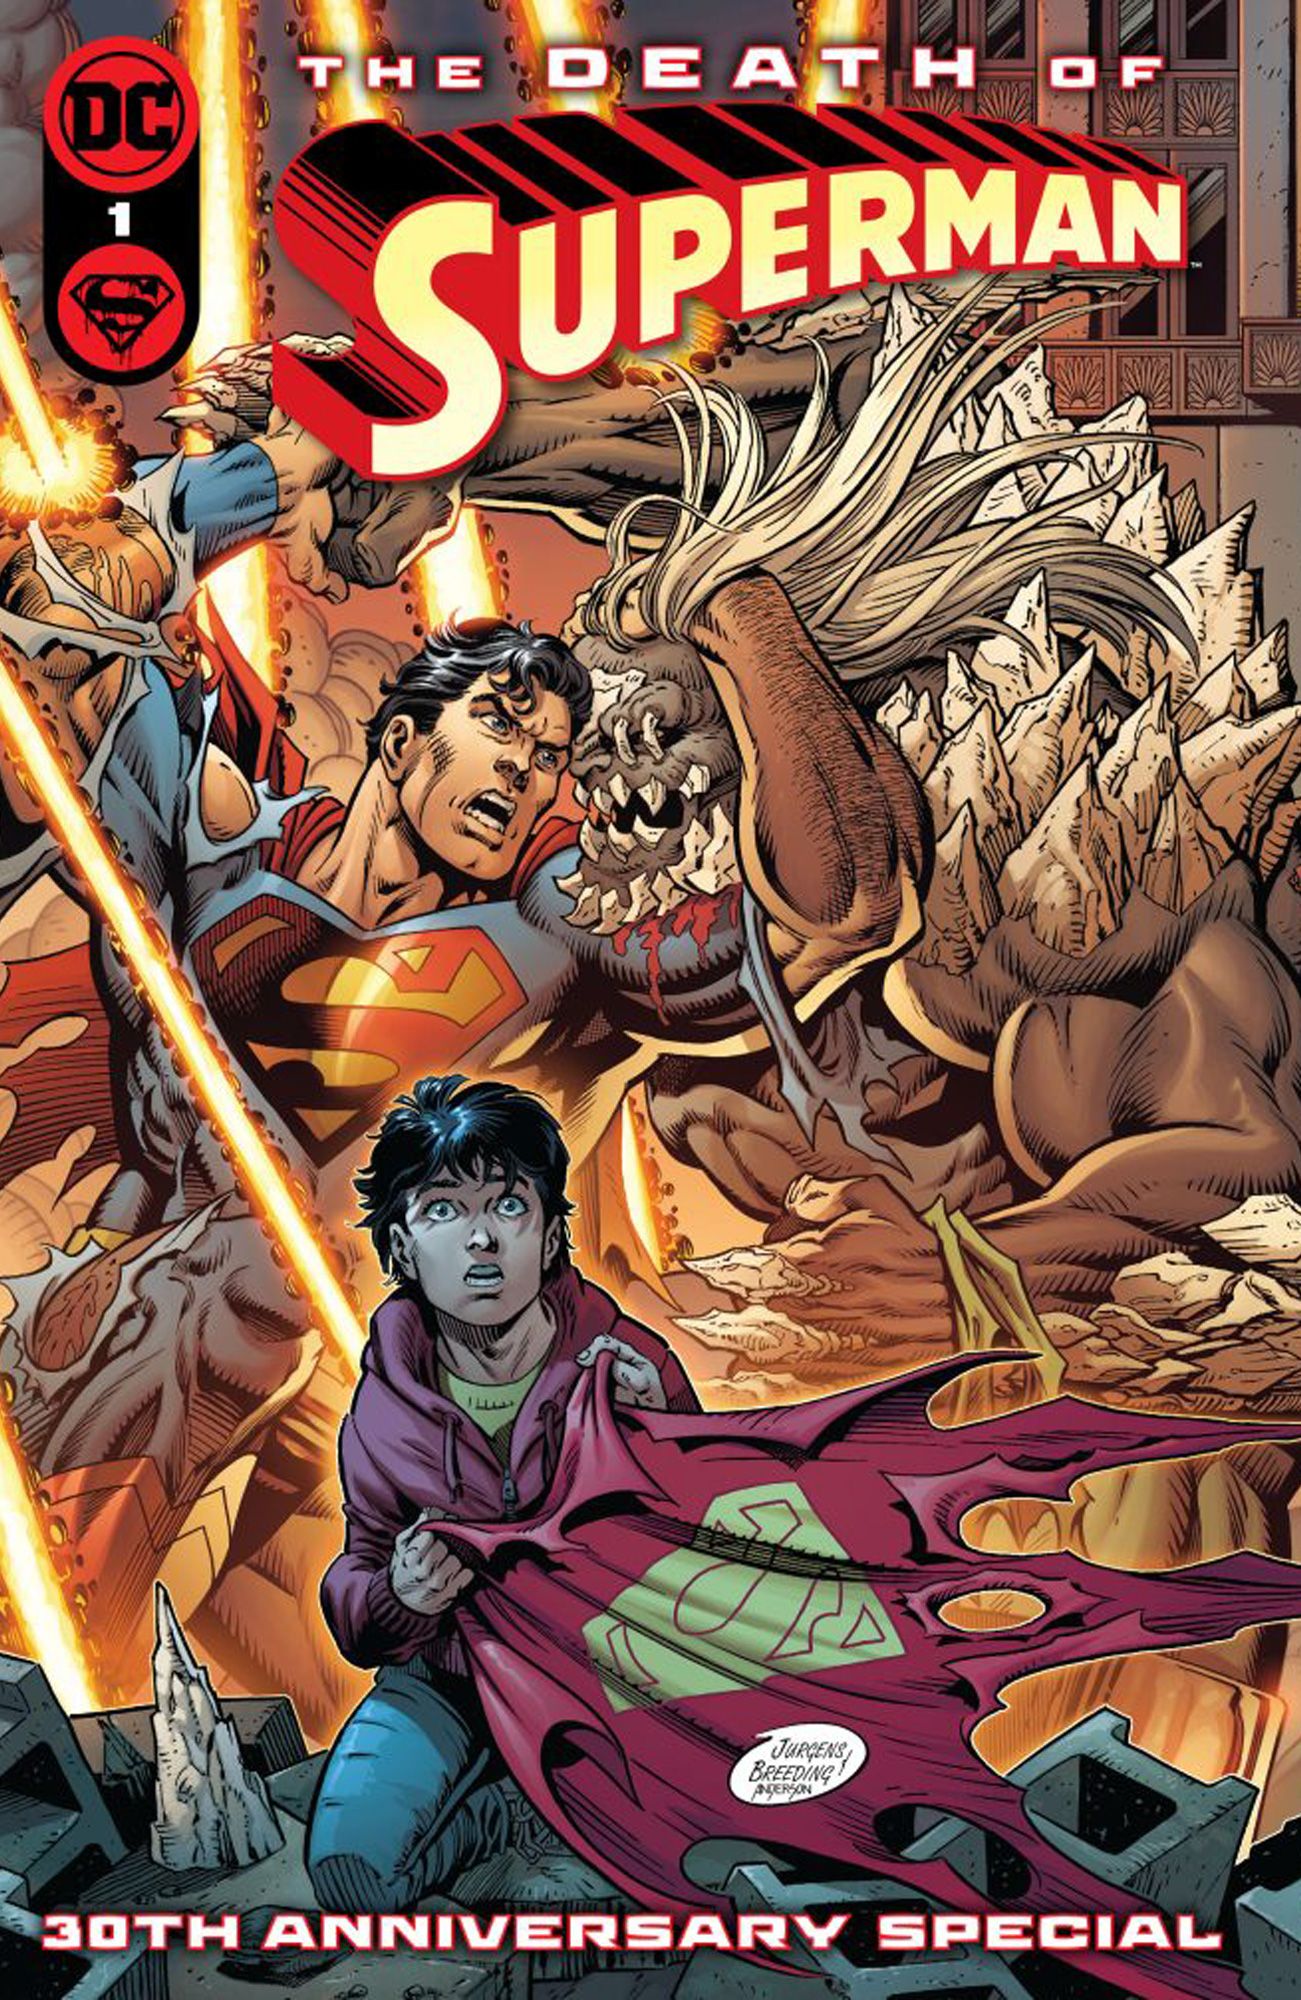 REVIEW: DC's The Death of Superman 30th Anniversary Special #1